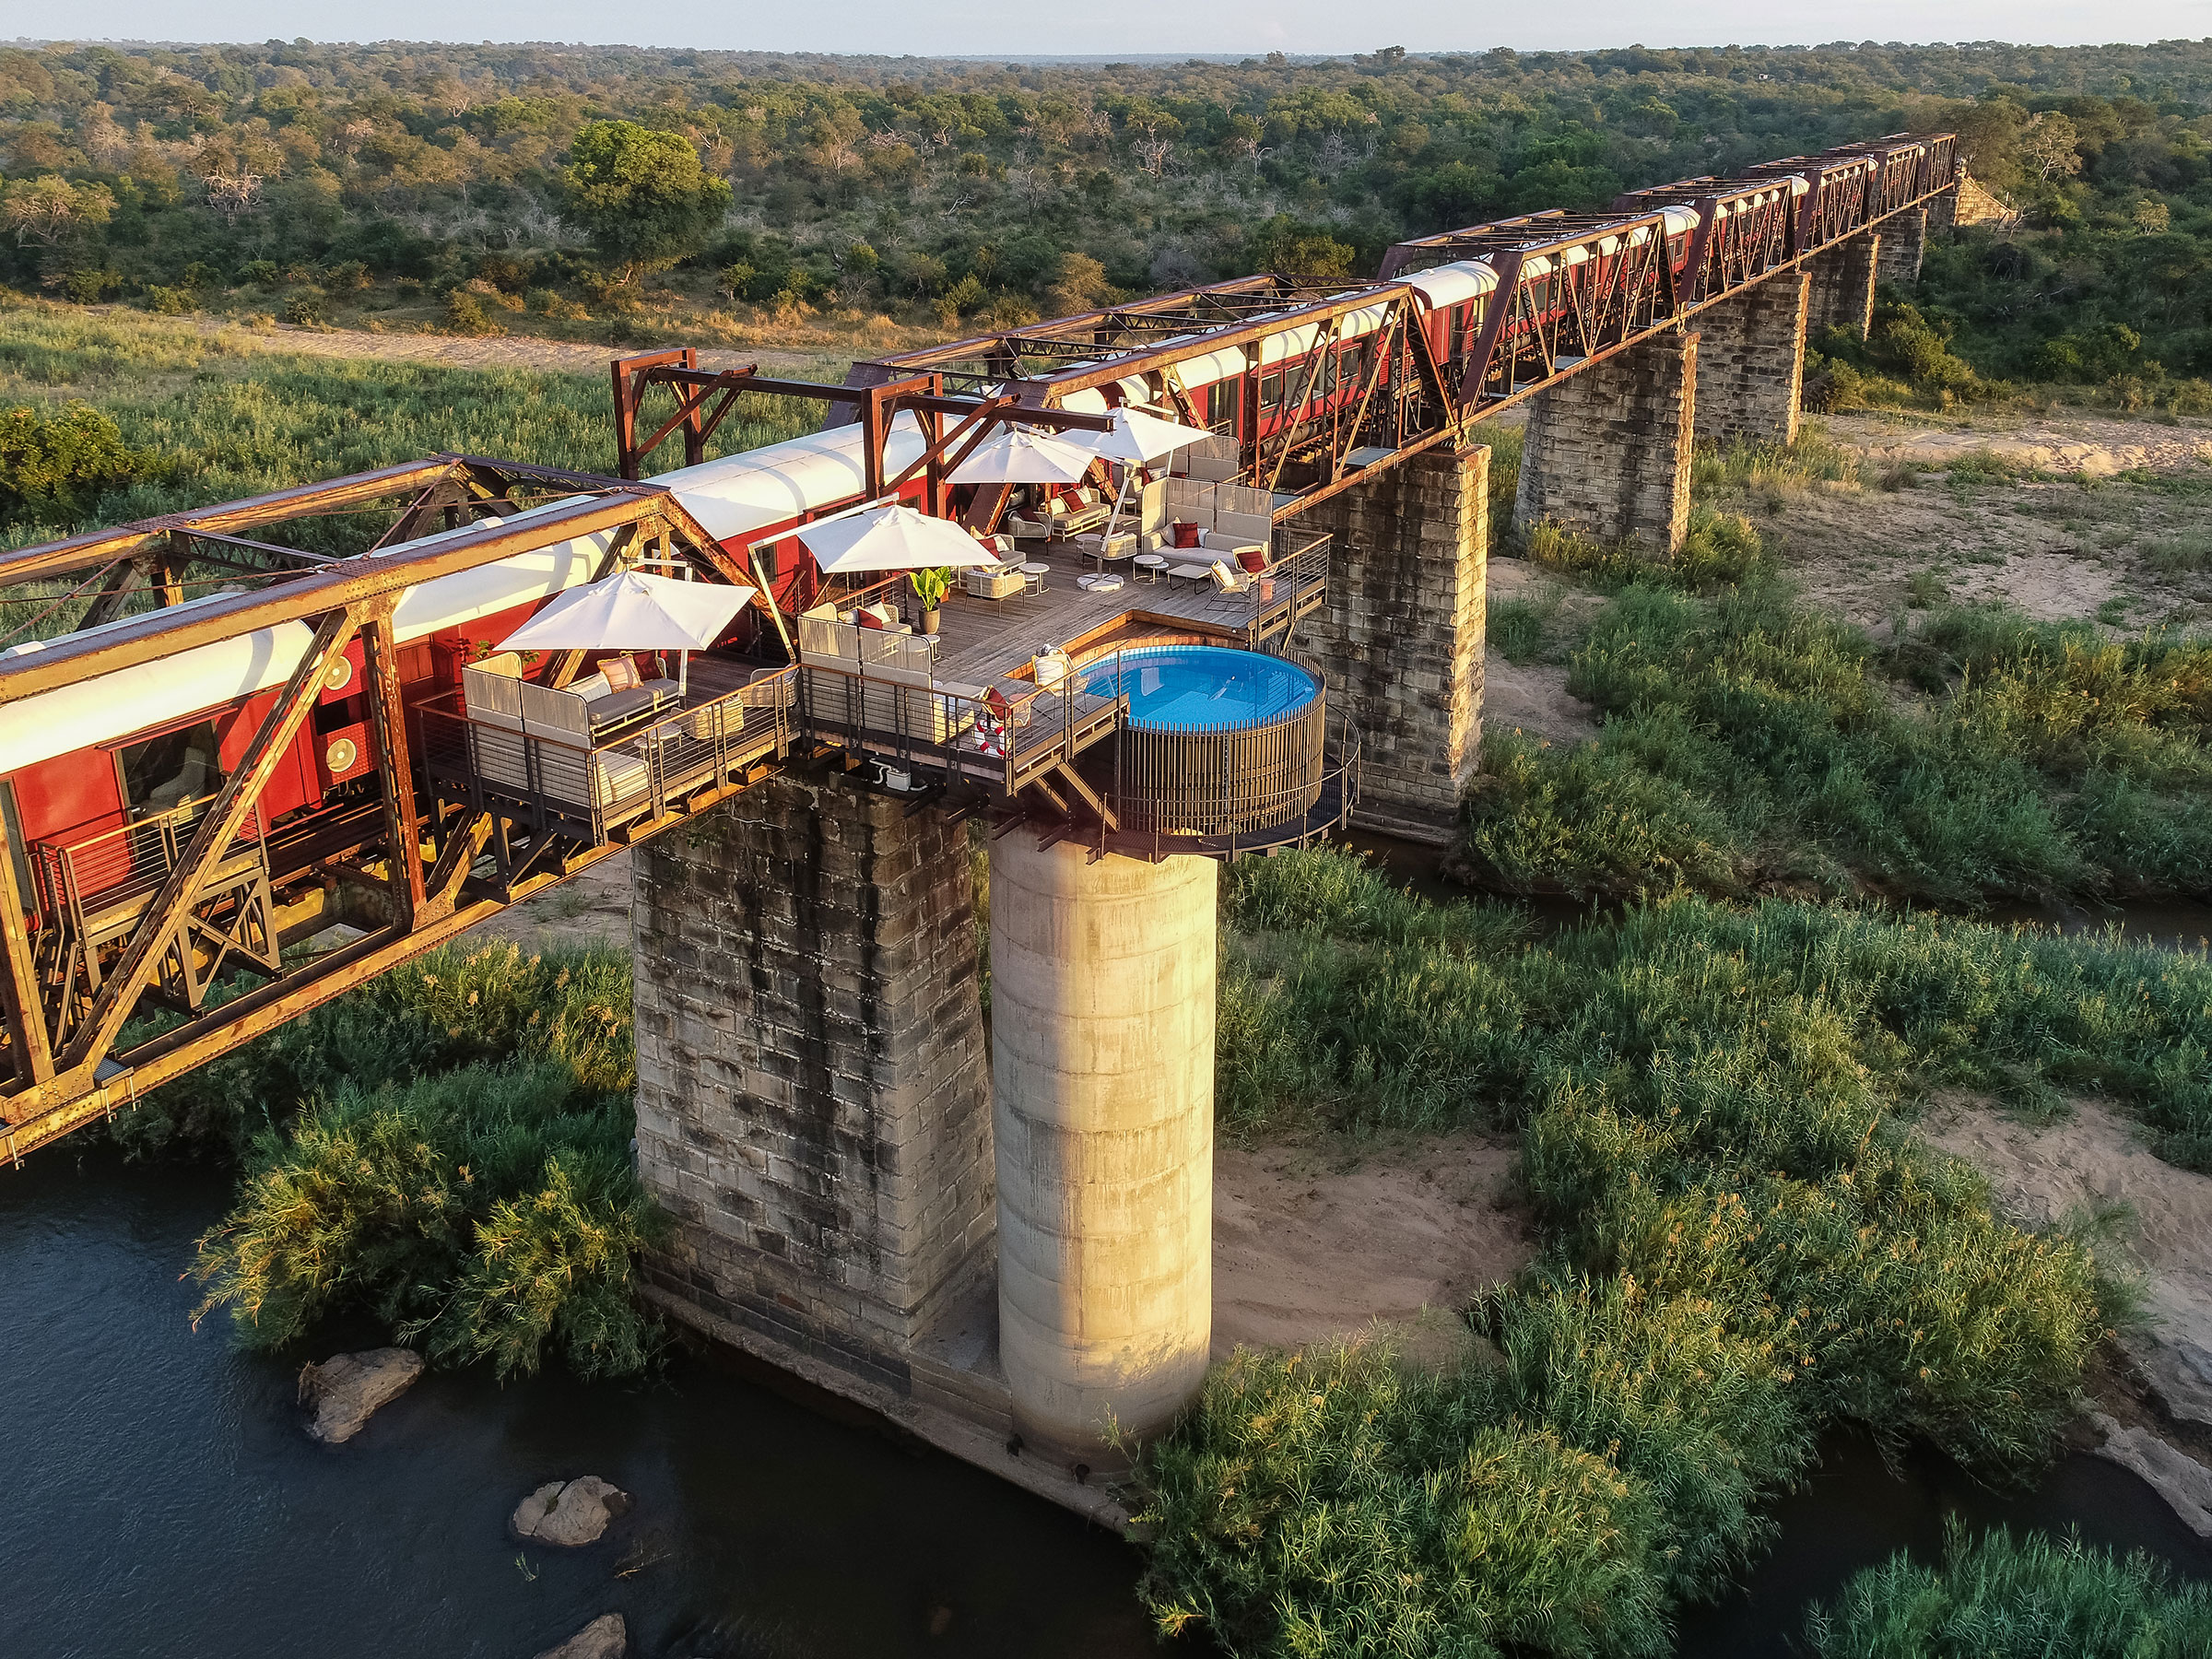 The Kruger Shalati hotel—in which guests can stay in renovated train cars that are perched on a bridge—in Kruger National Park, South Africa (Courtesy Kruger Shalati)